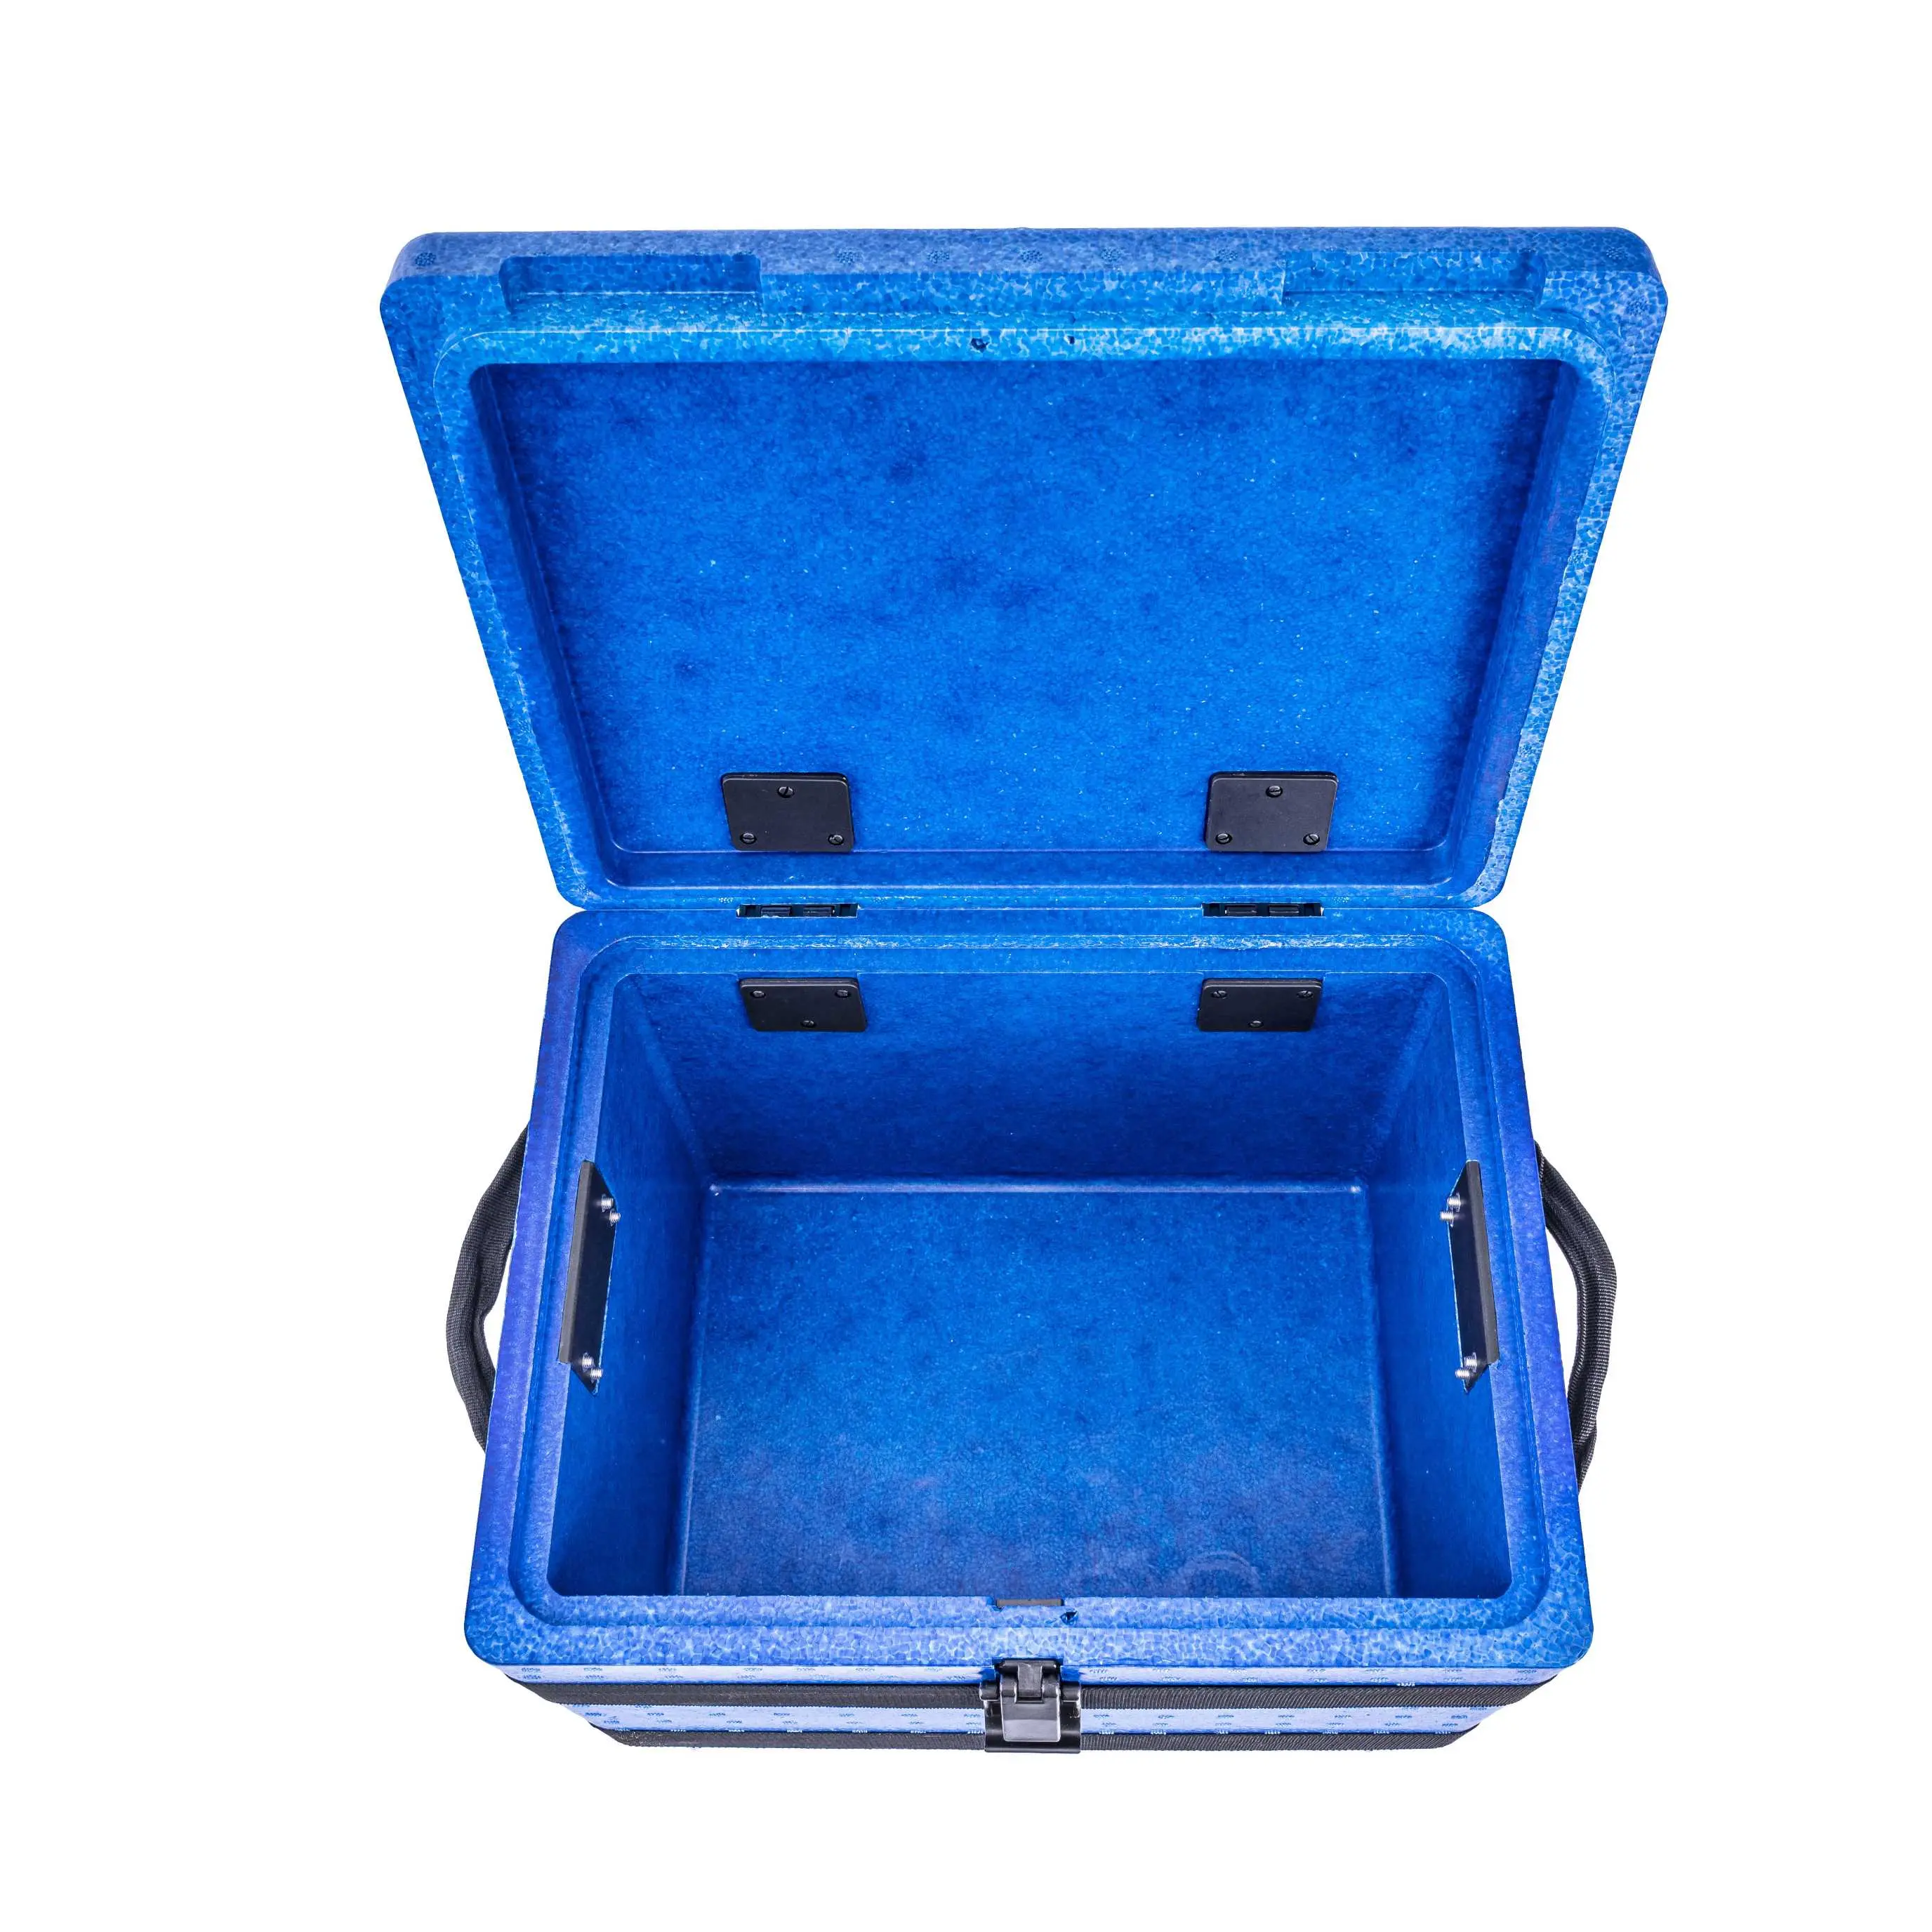 What is EPP Insulated Box Used For? How Strong is EPP Foam?